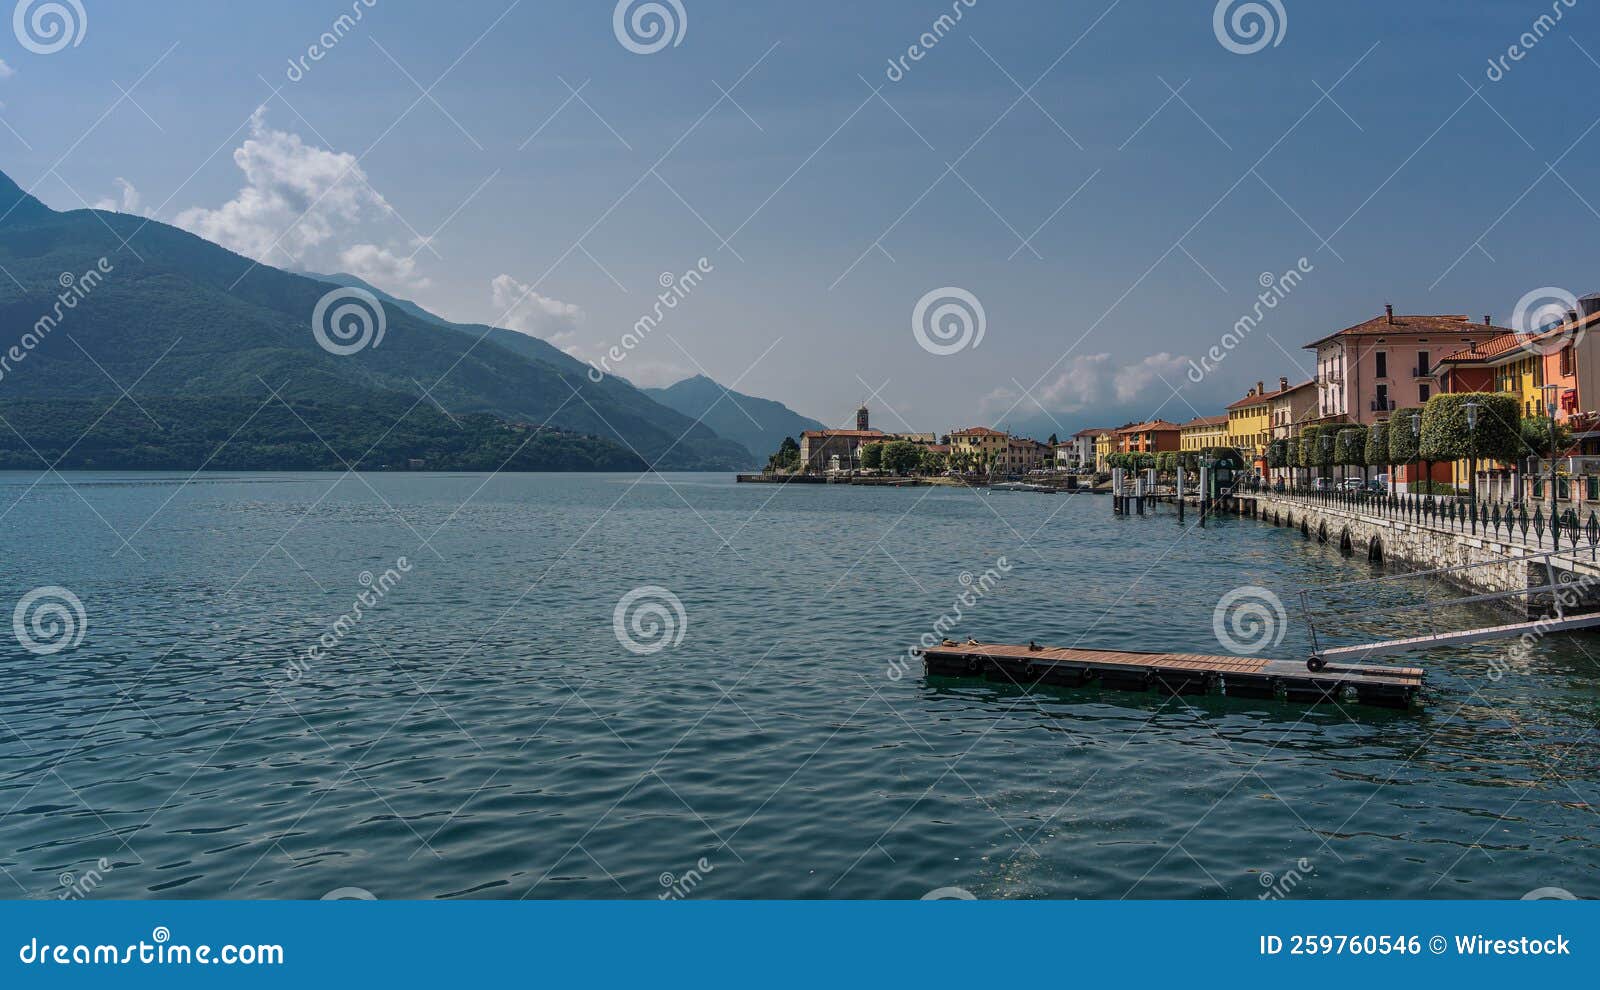 beautiful landscape of a shore near the green mountains in gravedona, comer see